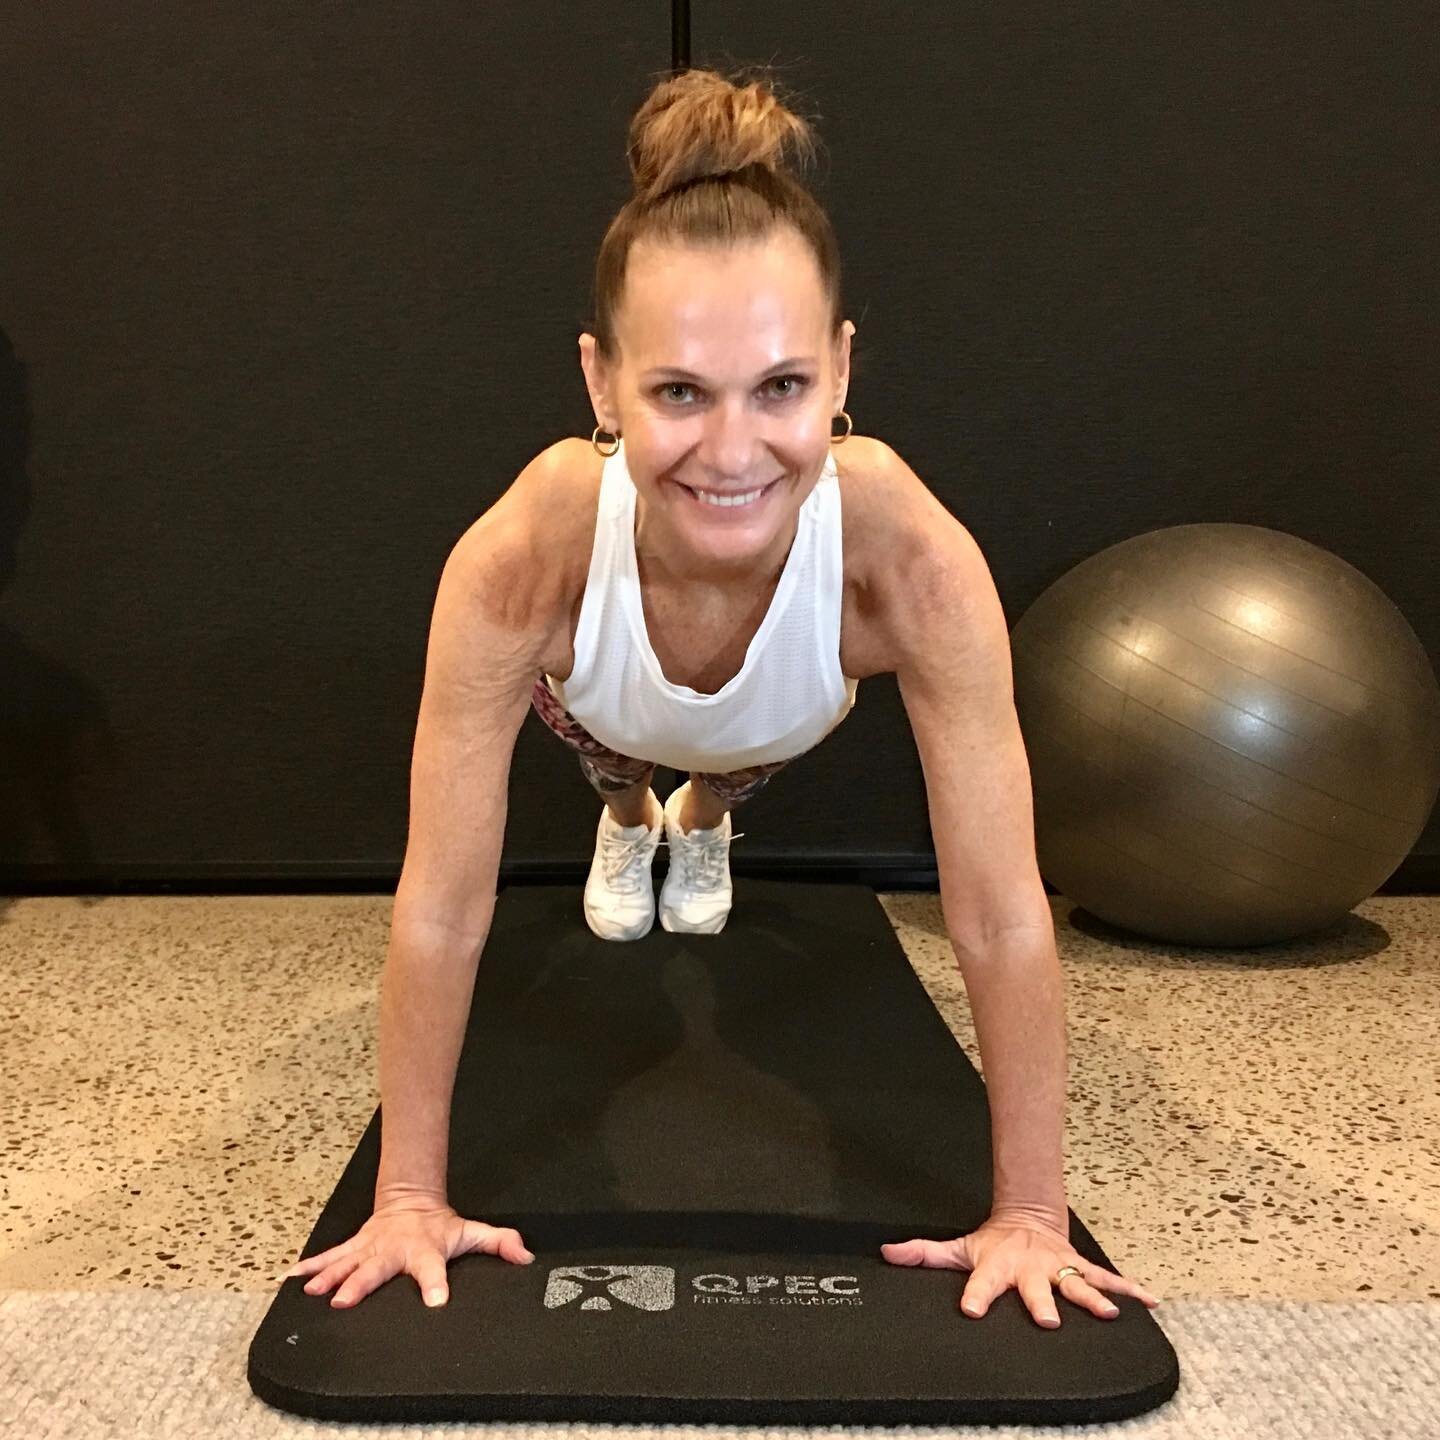 How are your press ups going? 
.
.
.
.
.
#bernpilates #noosasprings #augustchallenge #pressups #30daybodytonechallenge #30bodychallenge #getsummerbodyready #noosa #noosapilates #pilates #pilatesinstructor #lovepilates